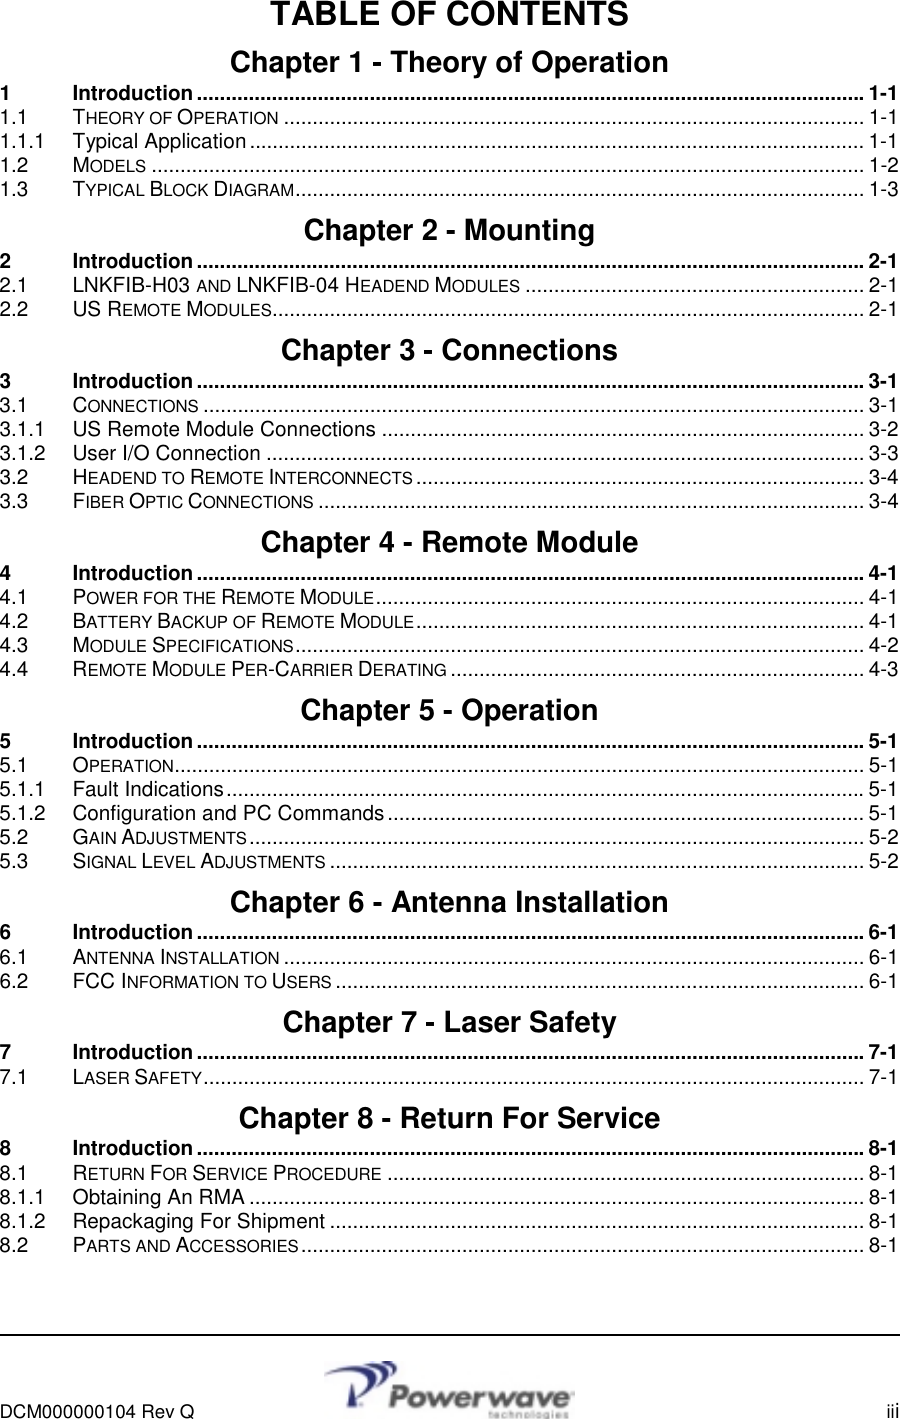      DCM000000104 Rev Q    iii  TABLE OF CONTENTS Chapter 1 - Theory of Operation 1 Introduction....................................................................................................................1-1 1.1 THEORY OF OPERATION ..................................................................................................... 1-1 1.1.1 Typical Application........................................................................................................... 1-1 1.2 MODELS ............................................................................................................................ 1-2 1.3 TYPICAL BLOCK DIAGRAM................................................................................................... 1-3 Chapter 2 - Mounting 2 Introduction....................................................................................................................2-1 2.1 LNKFIB-H03 AND LNKFIB-04 HEADEND MODULES ........................................................... 2-1 2.2 US REMOTE MODULES....................................................................................................... 2-1 Chapter 3 - Connections 3 Introduction....................................................................................................................3-1 3.1 CONNECTIONS ................................................................................................................... 3-1 3.1.1 US Remote Module Connections .................................................................................... 3-2 3.1.2 User I/O Connection ........................................................................................................ 3-3 3.2 HEADEND TO REMOTE INTERCONNECTS .............................................................................. 3-4 3.3 FIBER OPTIC CONNECTIONS ............................................................................................... 3-4 Chapter 4 - Remote Module 4 Introduction....................................................................................................................4-1 4.1 POWER FOR THE REMOTE MODULE..................................................................................... 4-1 4.2 BATTERY BACKUP OF REMOTE MODULE.............................................................................. 4-1 4.3 MODULE SPECIFICATIONS................................................................................................... 4-2 4.4 REMOTE MODULE PER-CARRIER DERATING ........................................................................ 4-3 Chapter 5 - Operation 5 Introduction....................................................................................................................5-1 5.1 OPERATION........................................................................................................................ 5-1 5.1.1 Fault Indications...............................................................................................................5-1 5.1.2 Configuration and PC Commands ................................................................................... 5-1 5.2 GAIN ADJUSTMENTS........................................................................................................... 5-2 5.3 SIGNAL LEVEL ADJUSTMENTS ............................................................................................. 5-2 Chapter 6 - Antenna Installation 6 Introduction....................................................................................................................6-1 6.1 ANTENNA INSTALLATION ..................................................................................................... 6-1 6.2 FCC INFORMATION TO USERS ............................................................................................ 6-1 Chapter 7 - Laser Safety 7 Introduction....................................................................................................................7-1 7.1 LASER SAFETY................................................................................................................... 7-1 Chapter 8 - Return For Service 8 Introduction....................................................................................................................8-1 8.1 RETURN FOR SERVICE PROCEDURE ................................................................................... 8-1 8.1.1 Obtaining An RMA ........................................................................................................... 8-1 8.1.2 Repackaging For Shipment ............................................................................................. 8-1 8.2 PARTS AND ACCESSORIES.................................................................................................. 8-1  